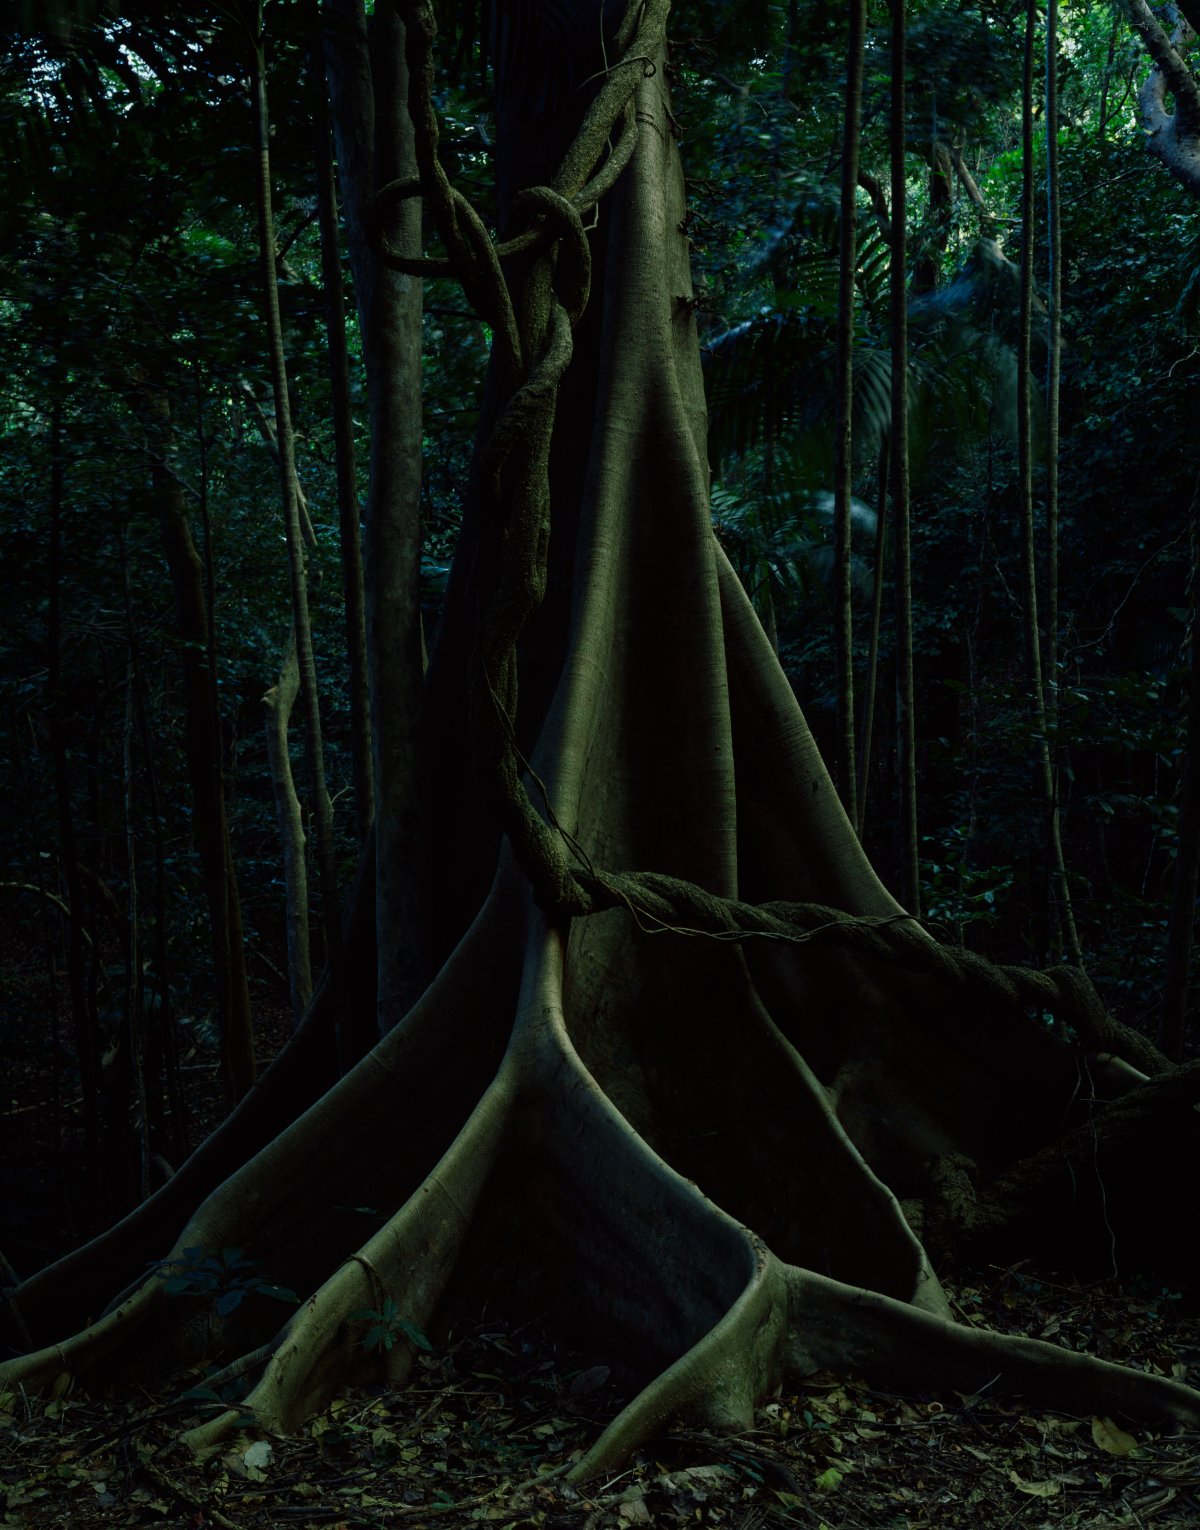 A scene deep in a jungle. Large buttress roots of a tree spread across the ground. Vines descend from the canopy.